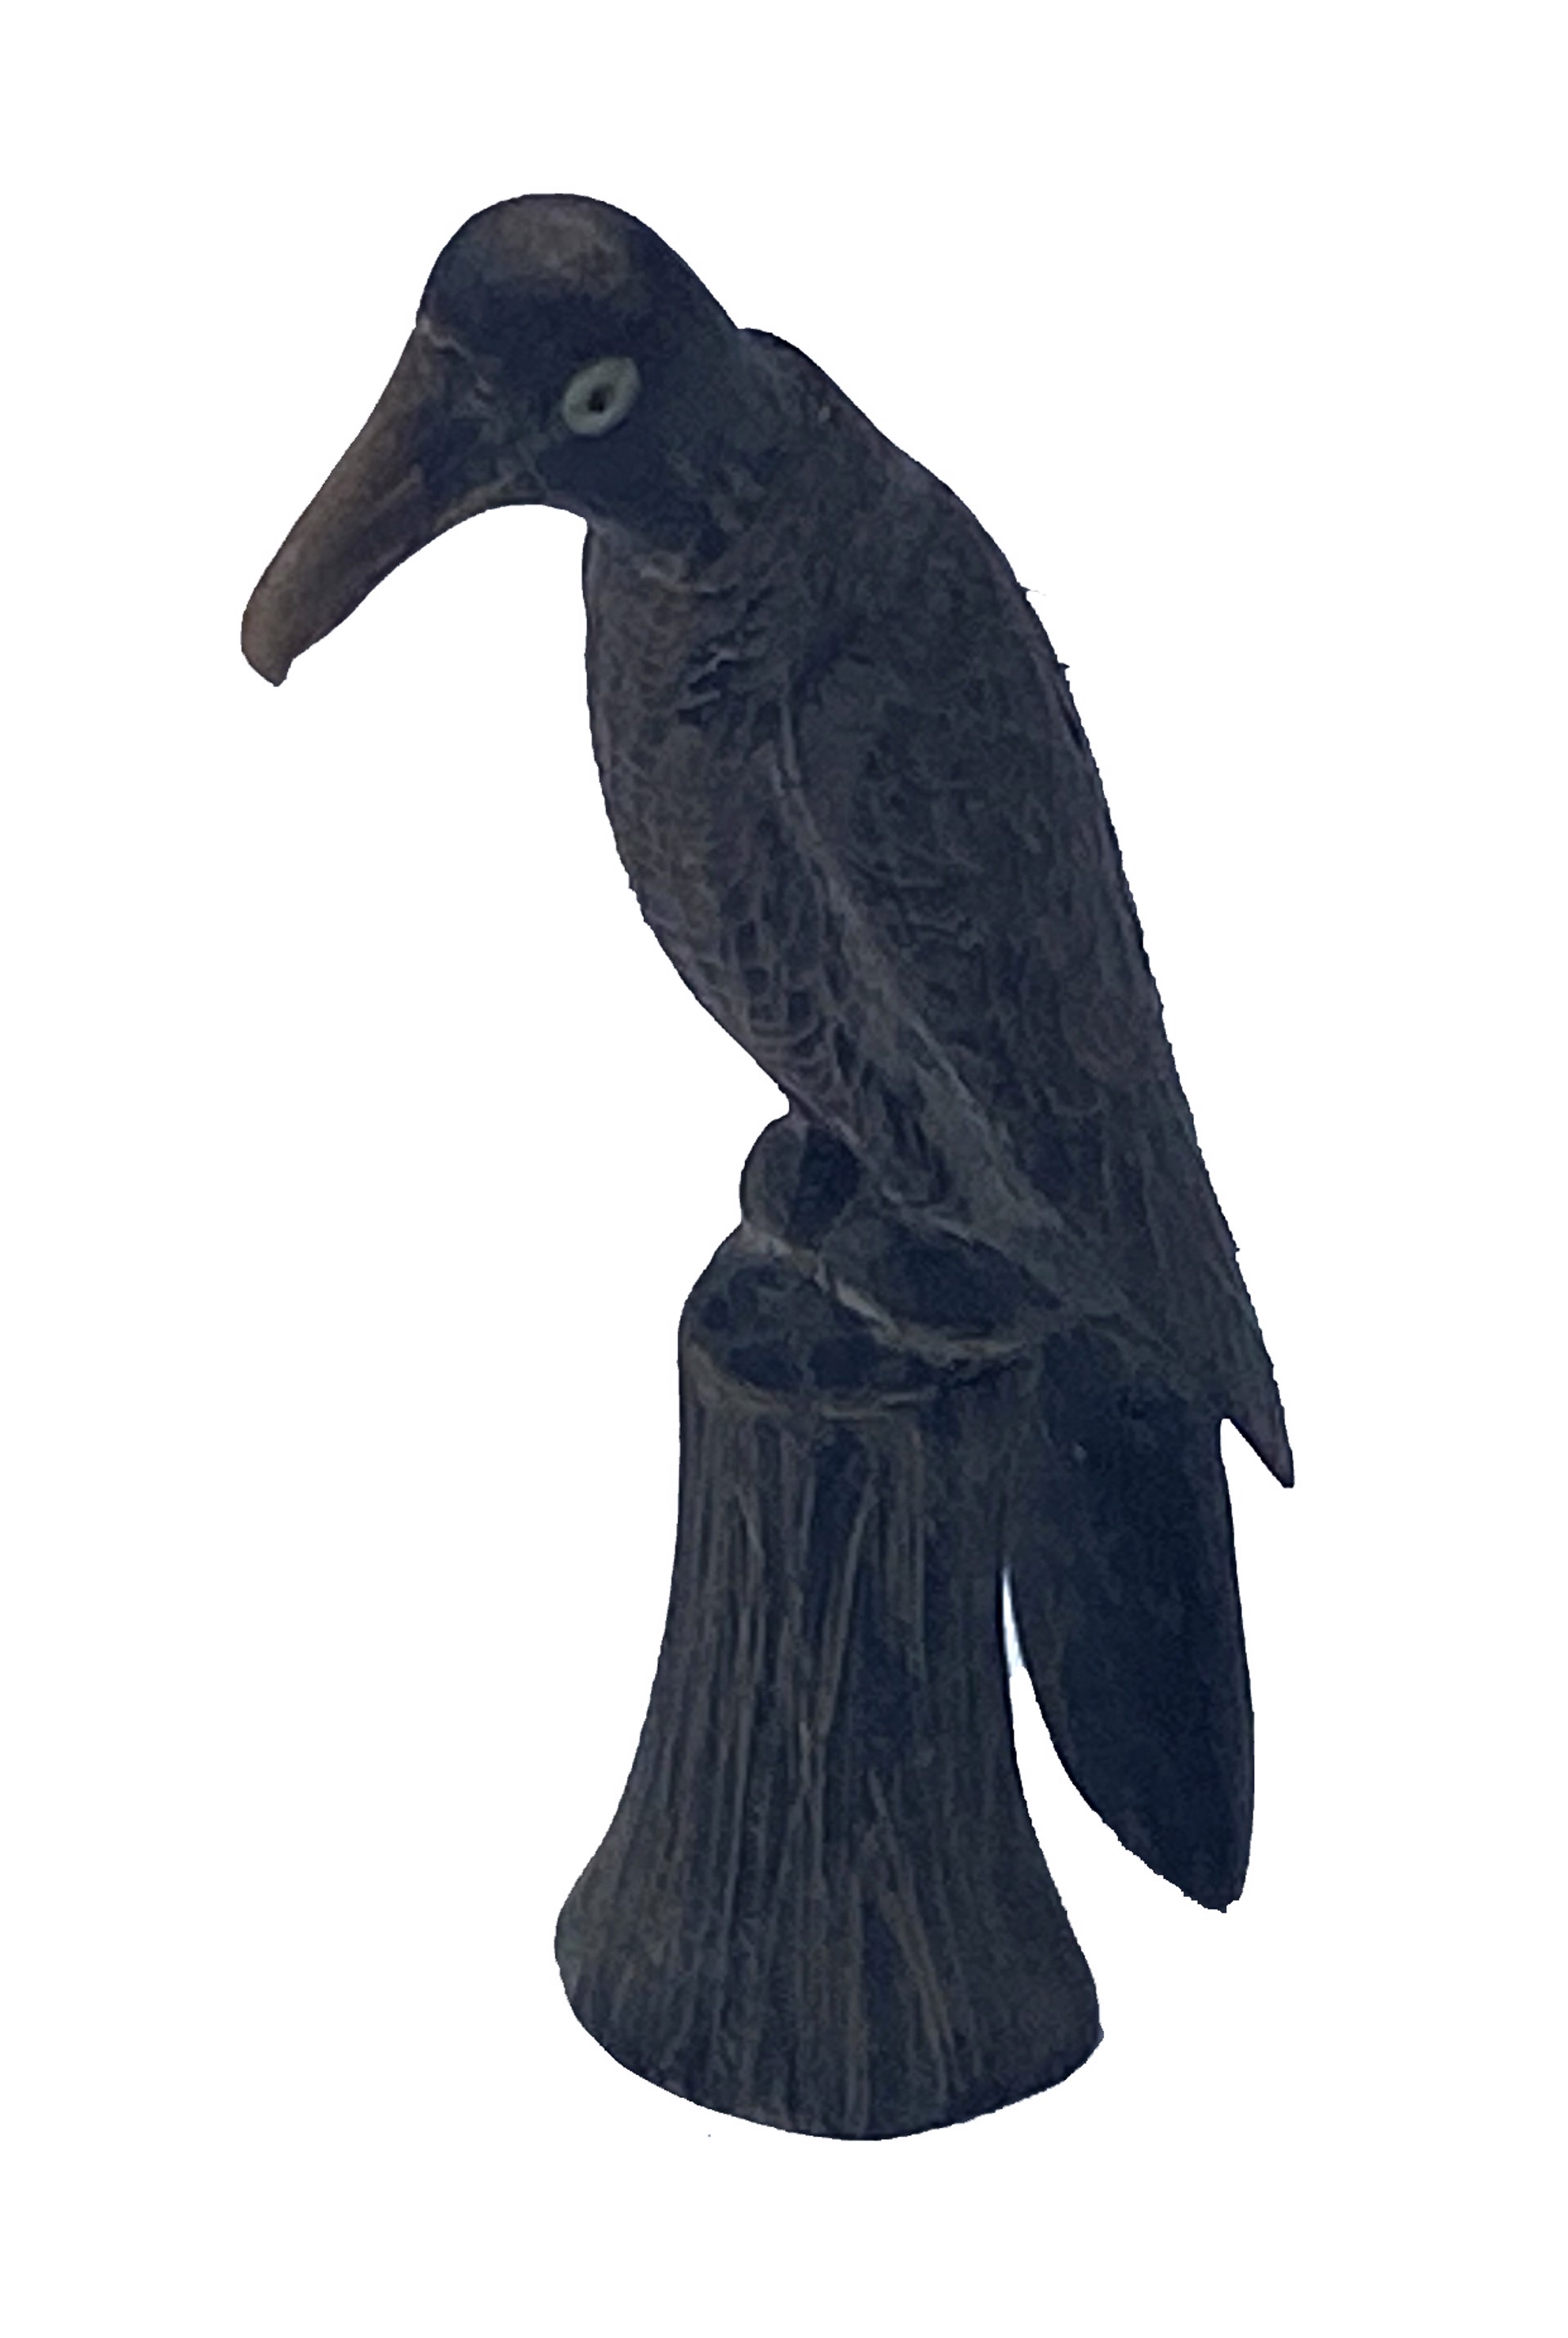 DS-39: extra small carved dark horn bird on base (large beak) by Dan Super